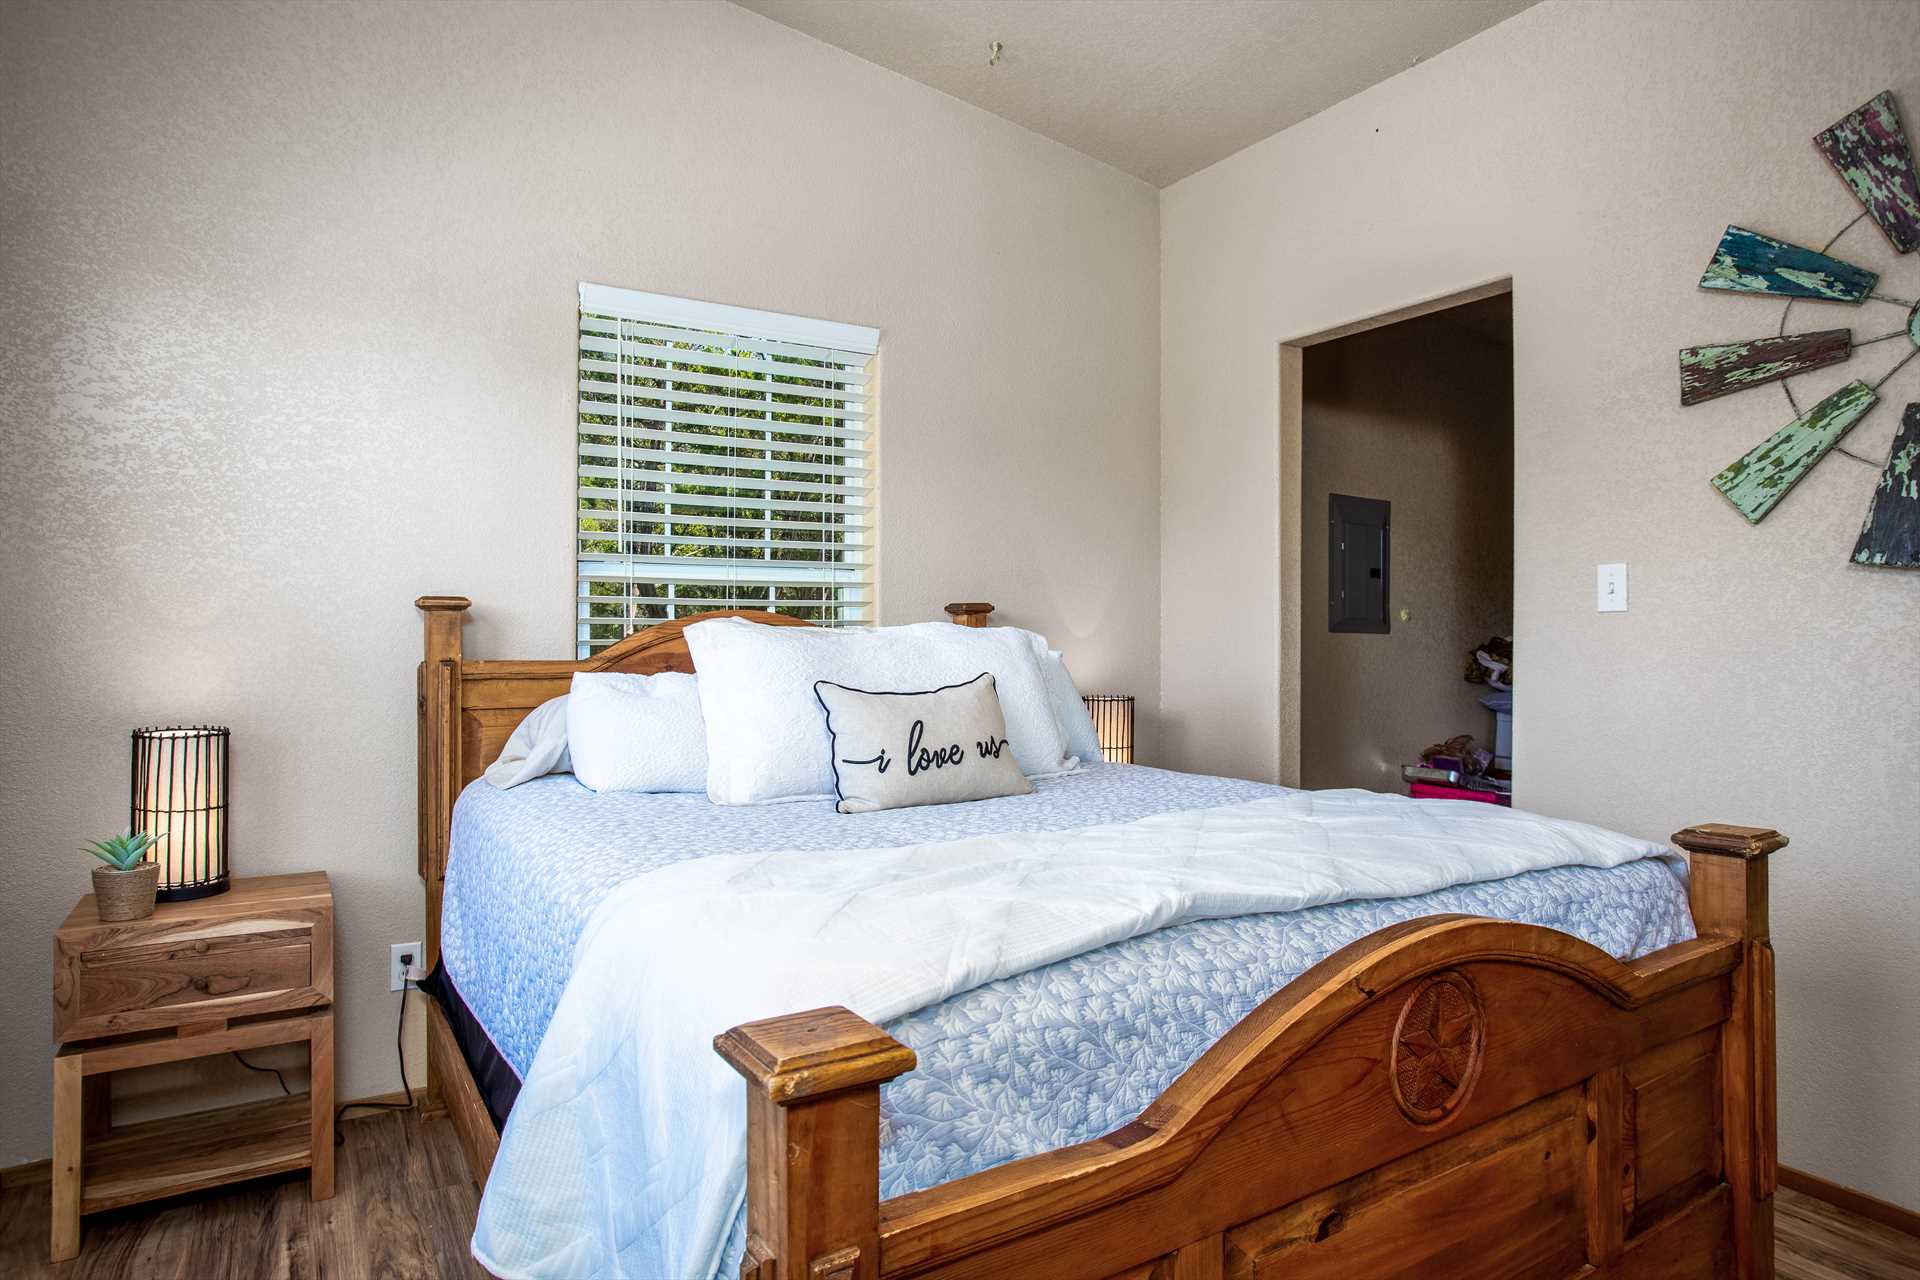                                                 Wrap yourself in country comfort during your nights at the Casita!